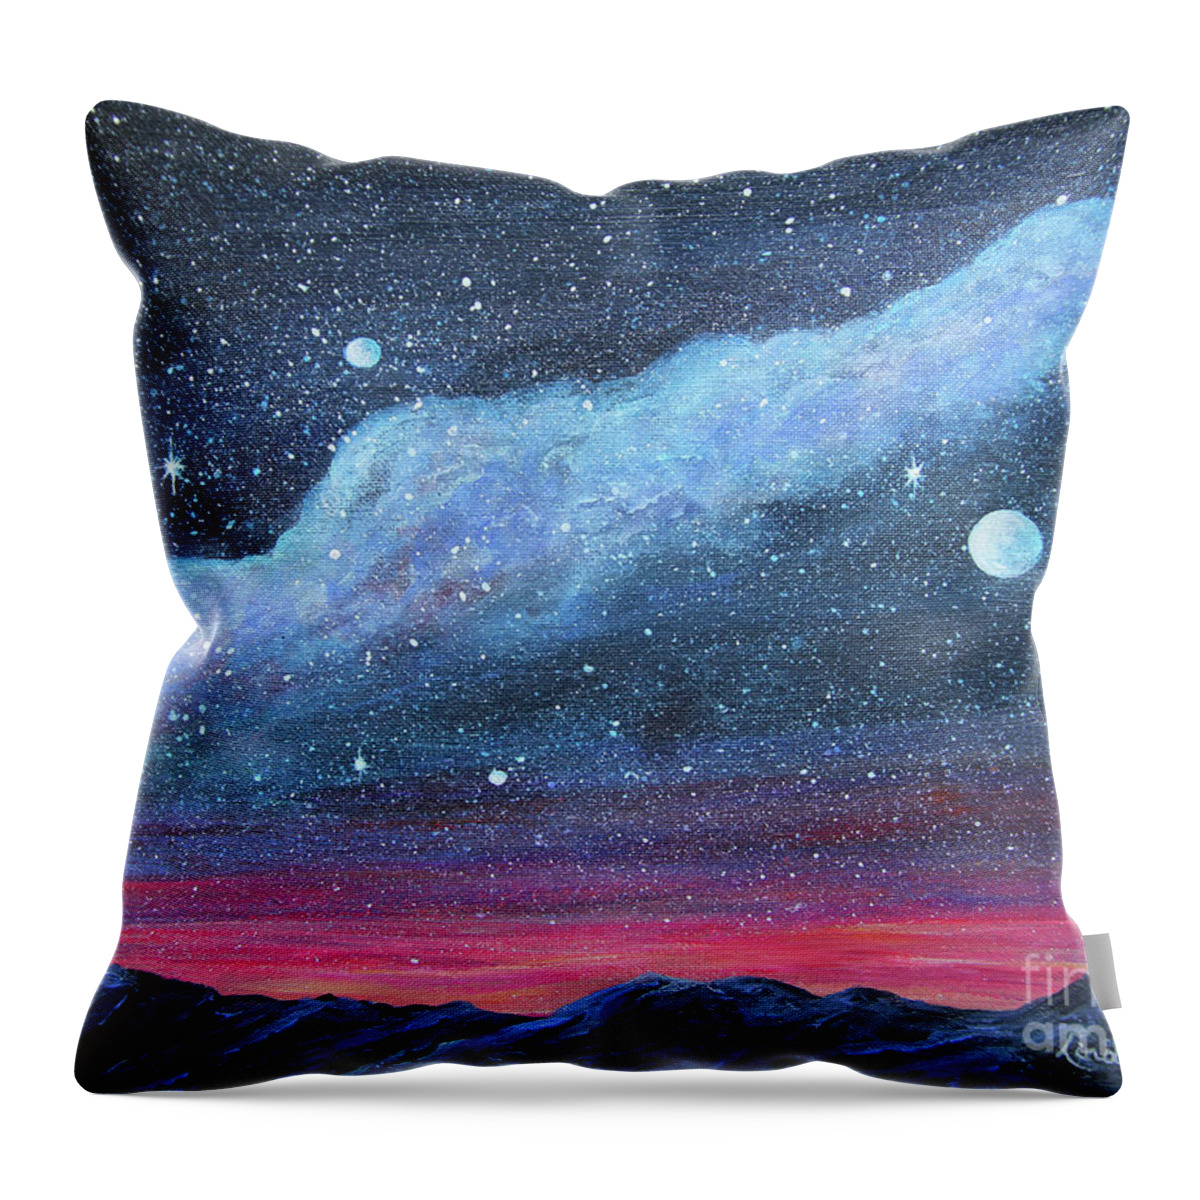 Acrylic Painting Throw Pillow featuring the painting Galaxy Wonder by Linda Goodman